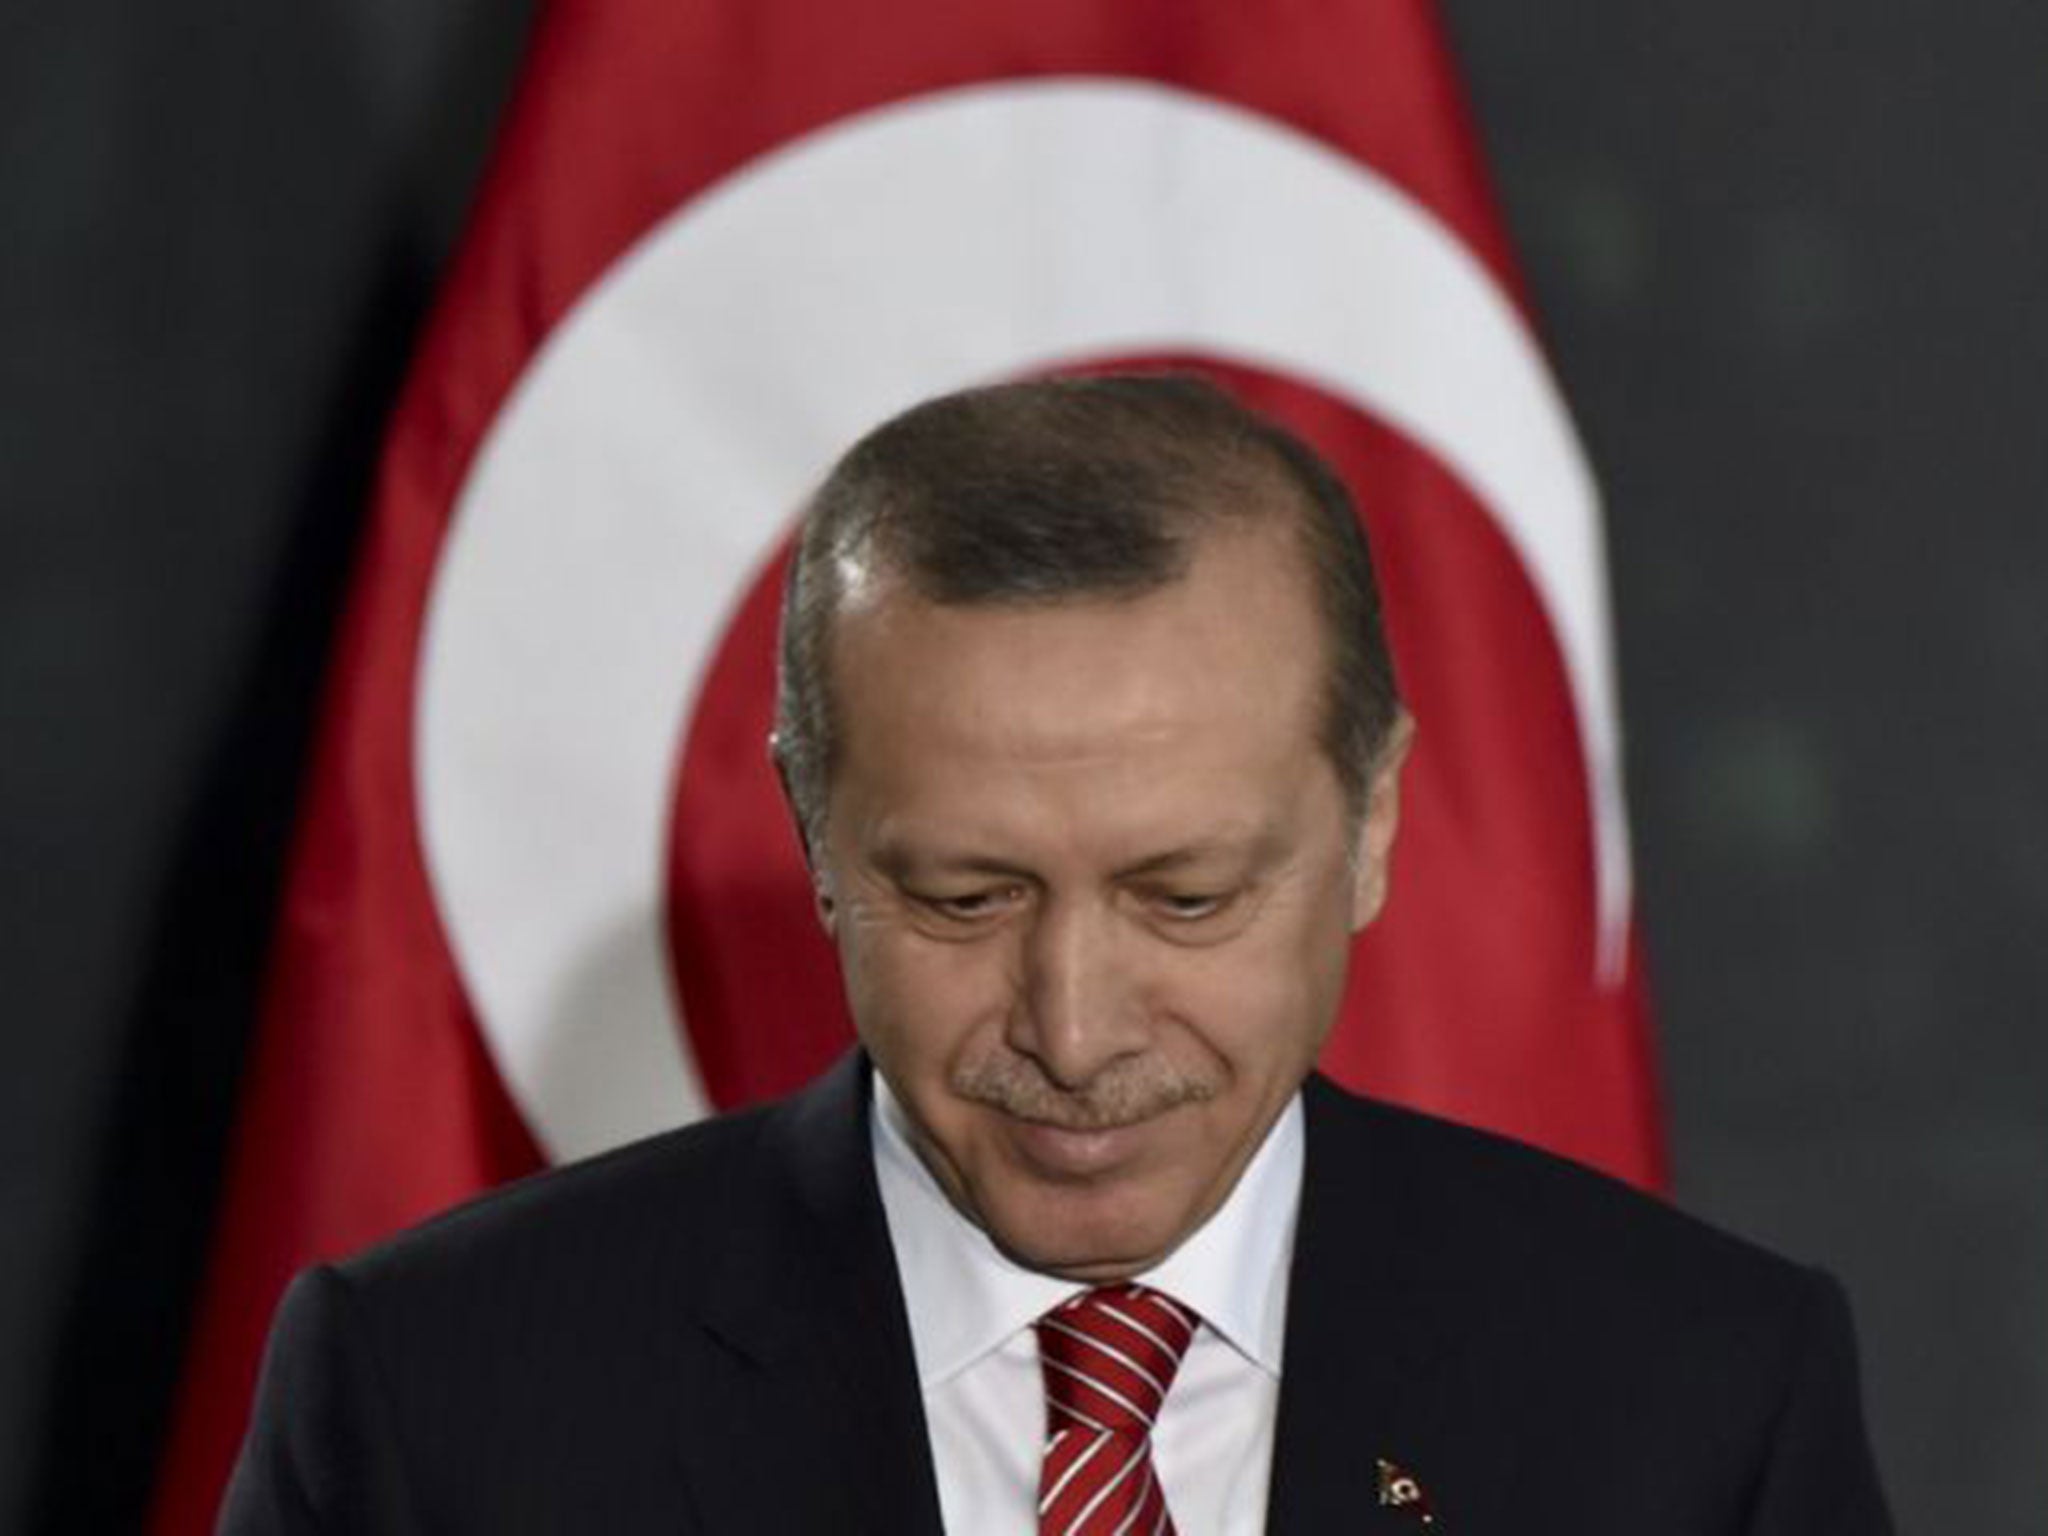 He promised Turkey a hopeful merging of Islam and modernity. Now he is becoming an all too familiar autocrat